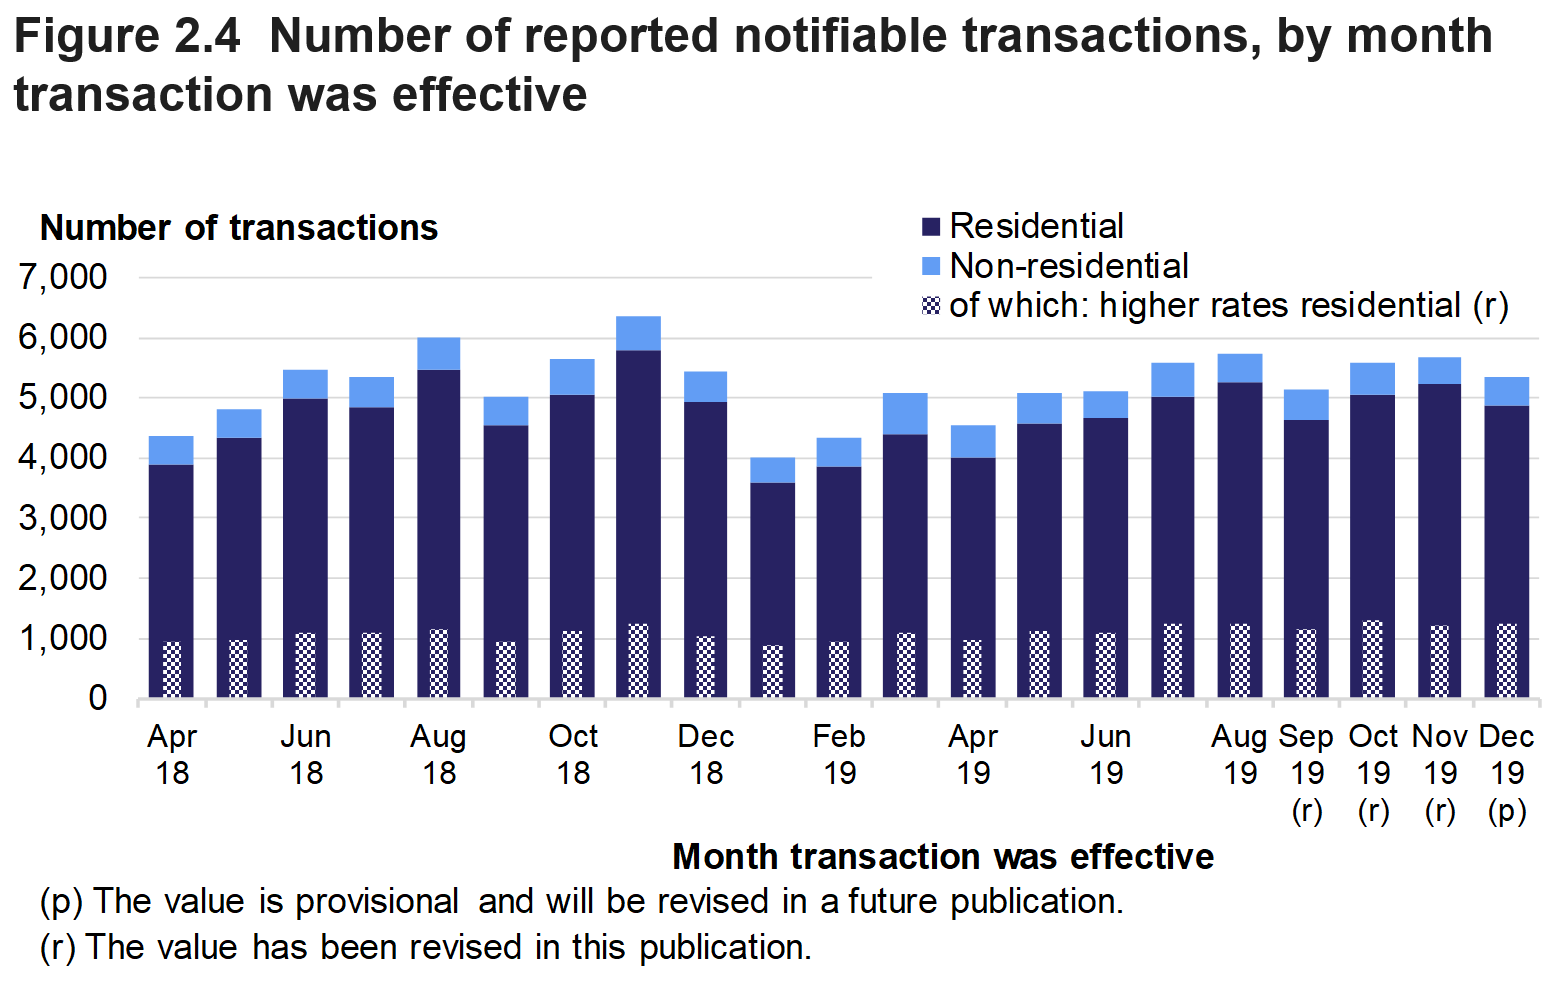 Figure 2.4 shows the monthly numbers of reported notifiable transactions from April 2018 to December 2019, for residential and non-residential transactions.